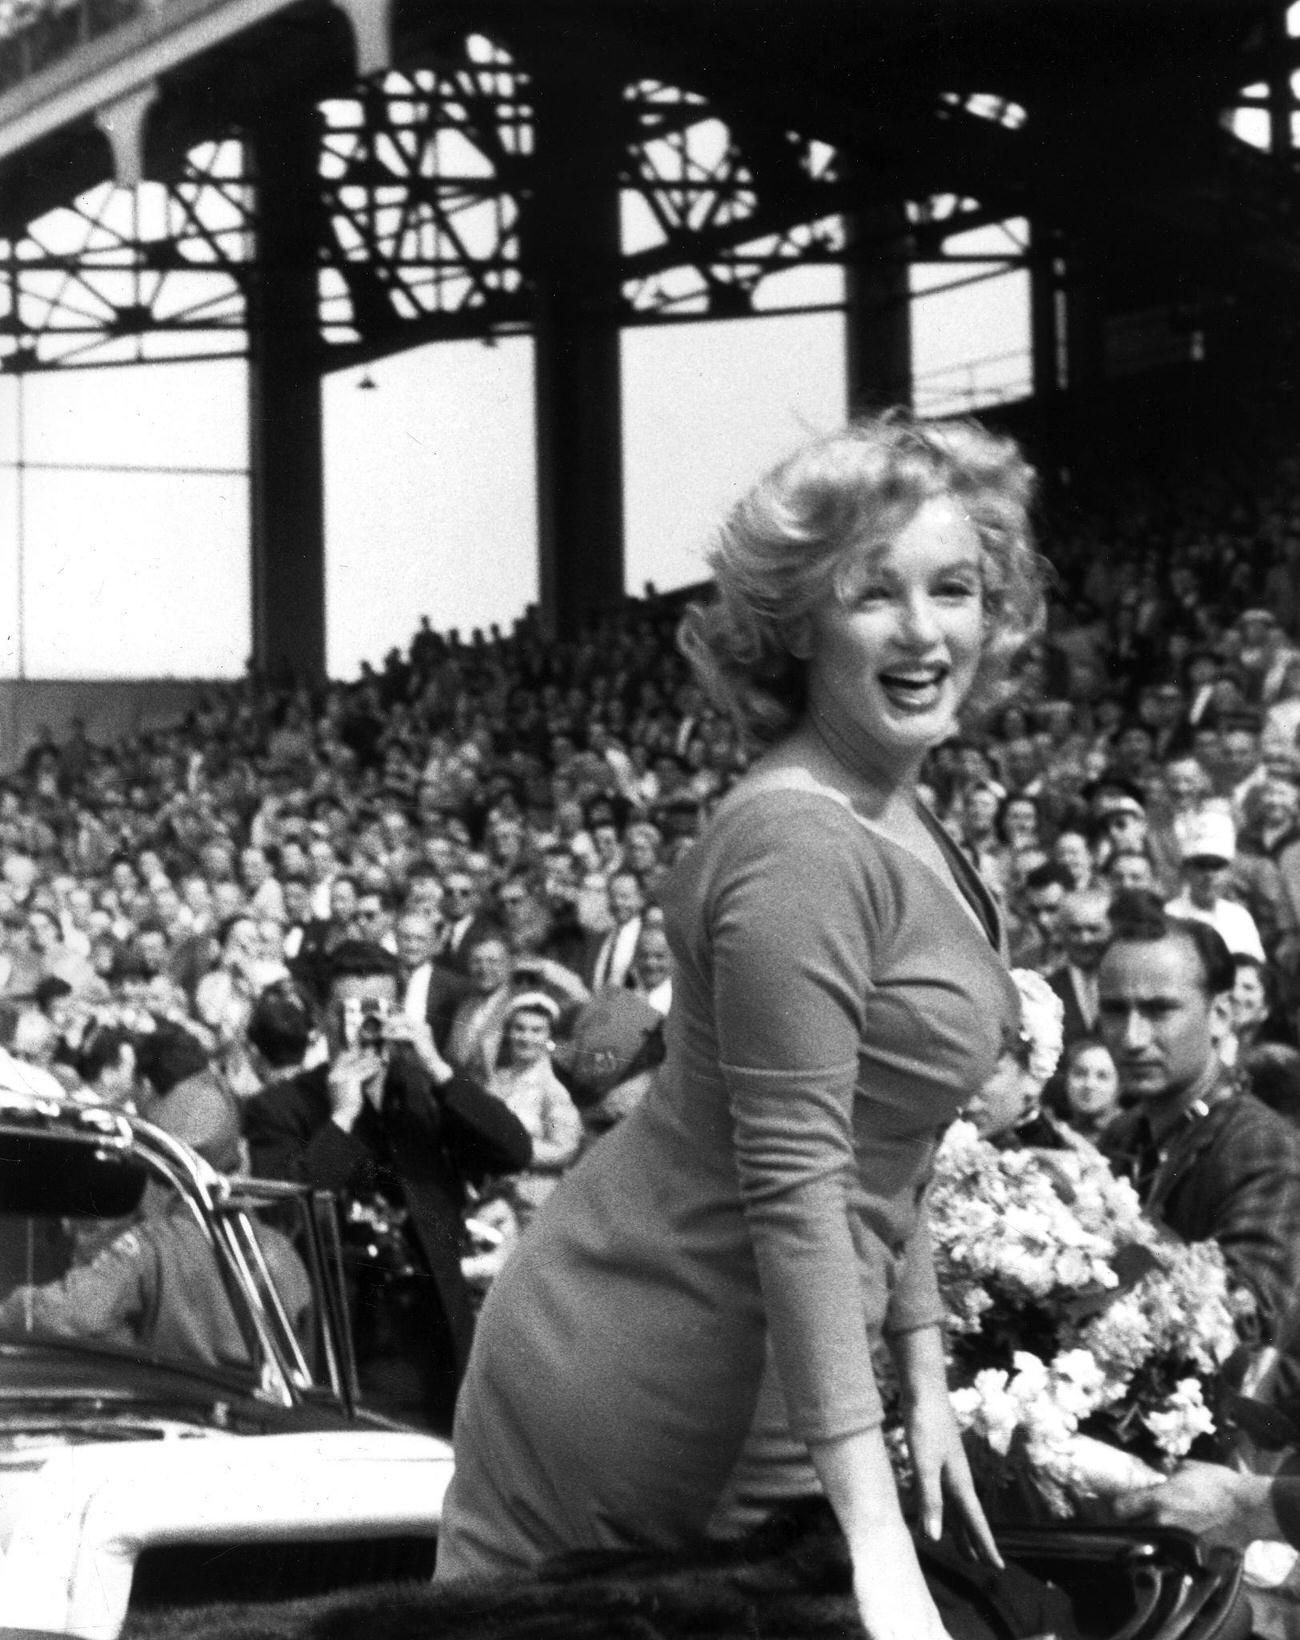 Marilyn Monroe In Convertible For Soccer Match Ceremony At Ebbets Field, 1957